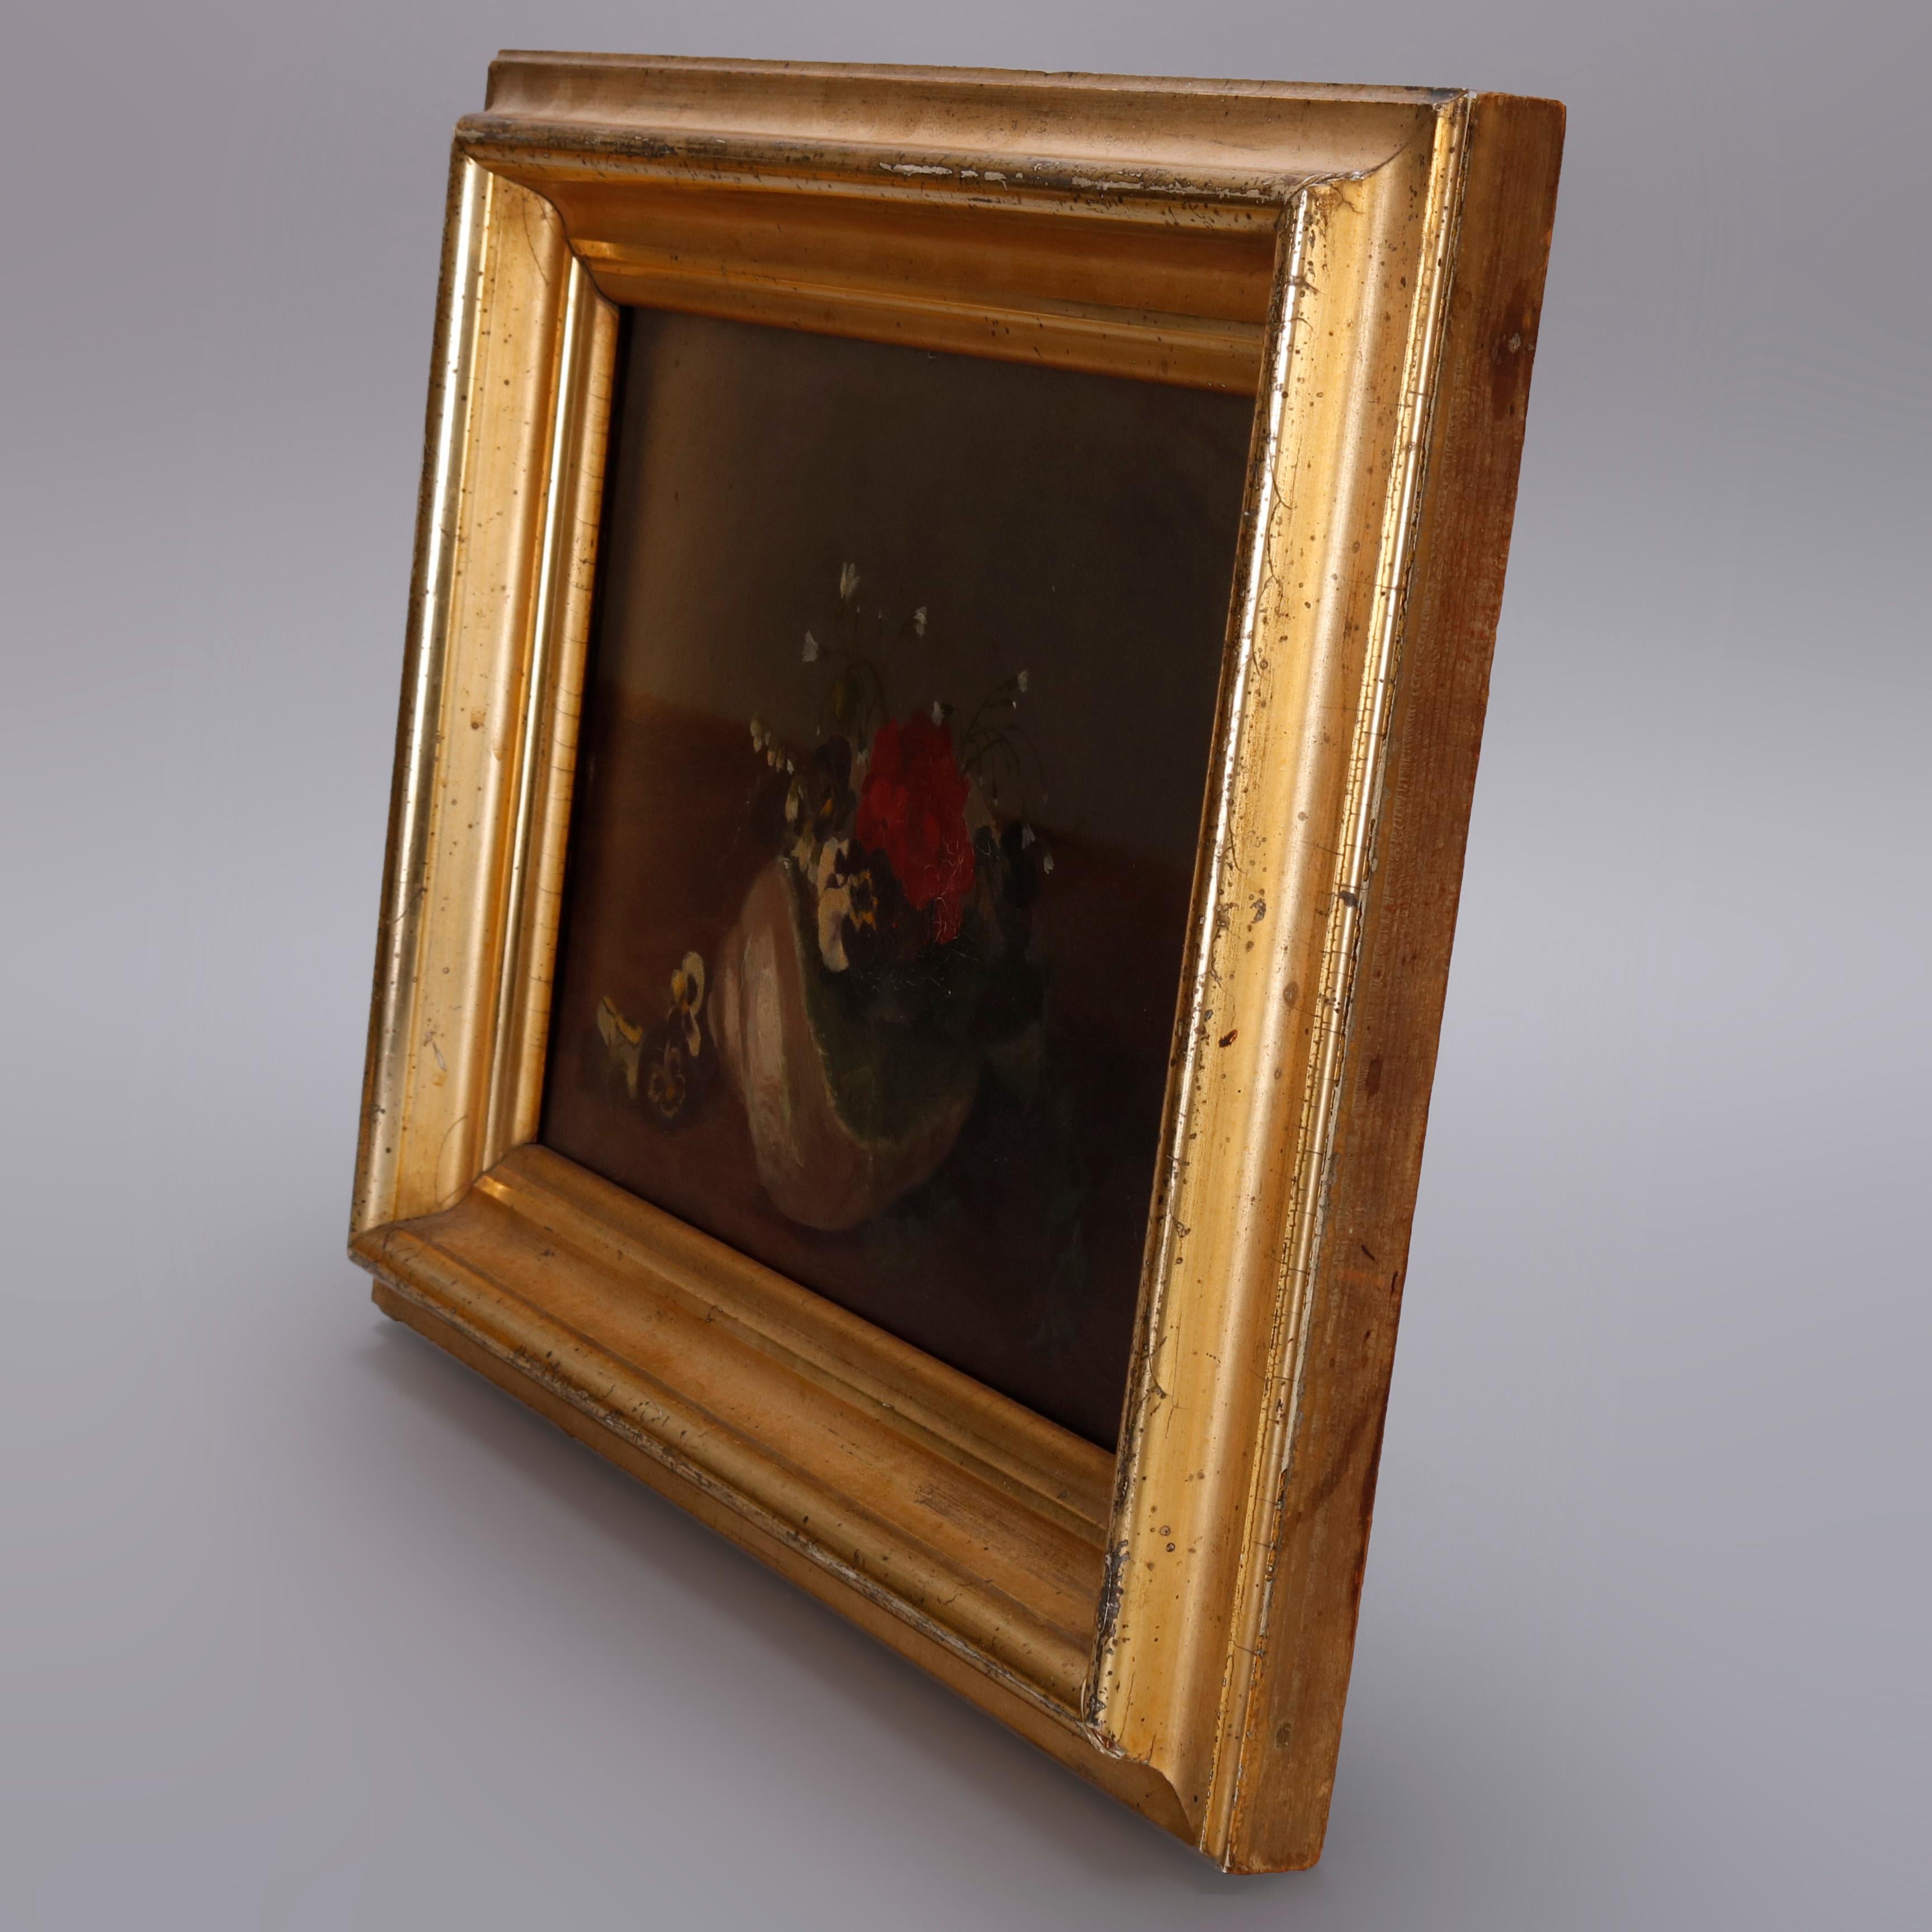 20th Century Floral and Seashell Still Life Painting in Giltwood Frame, Signed, circa 1900